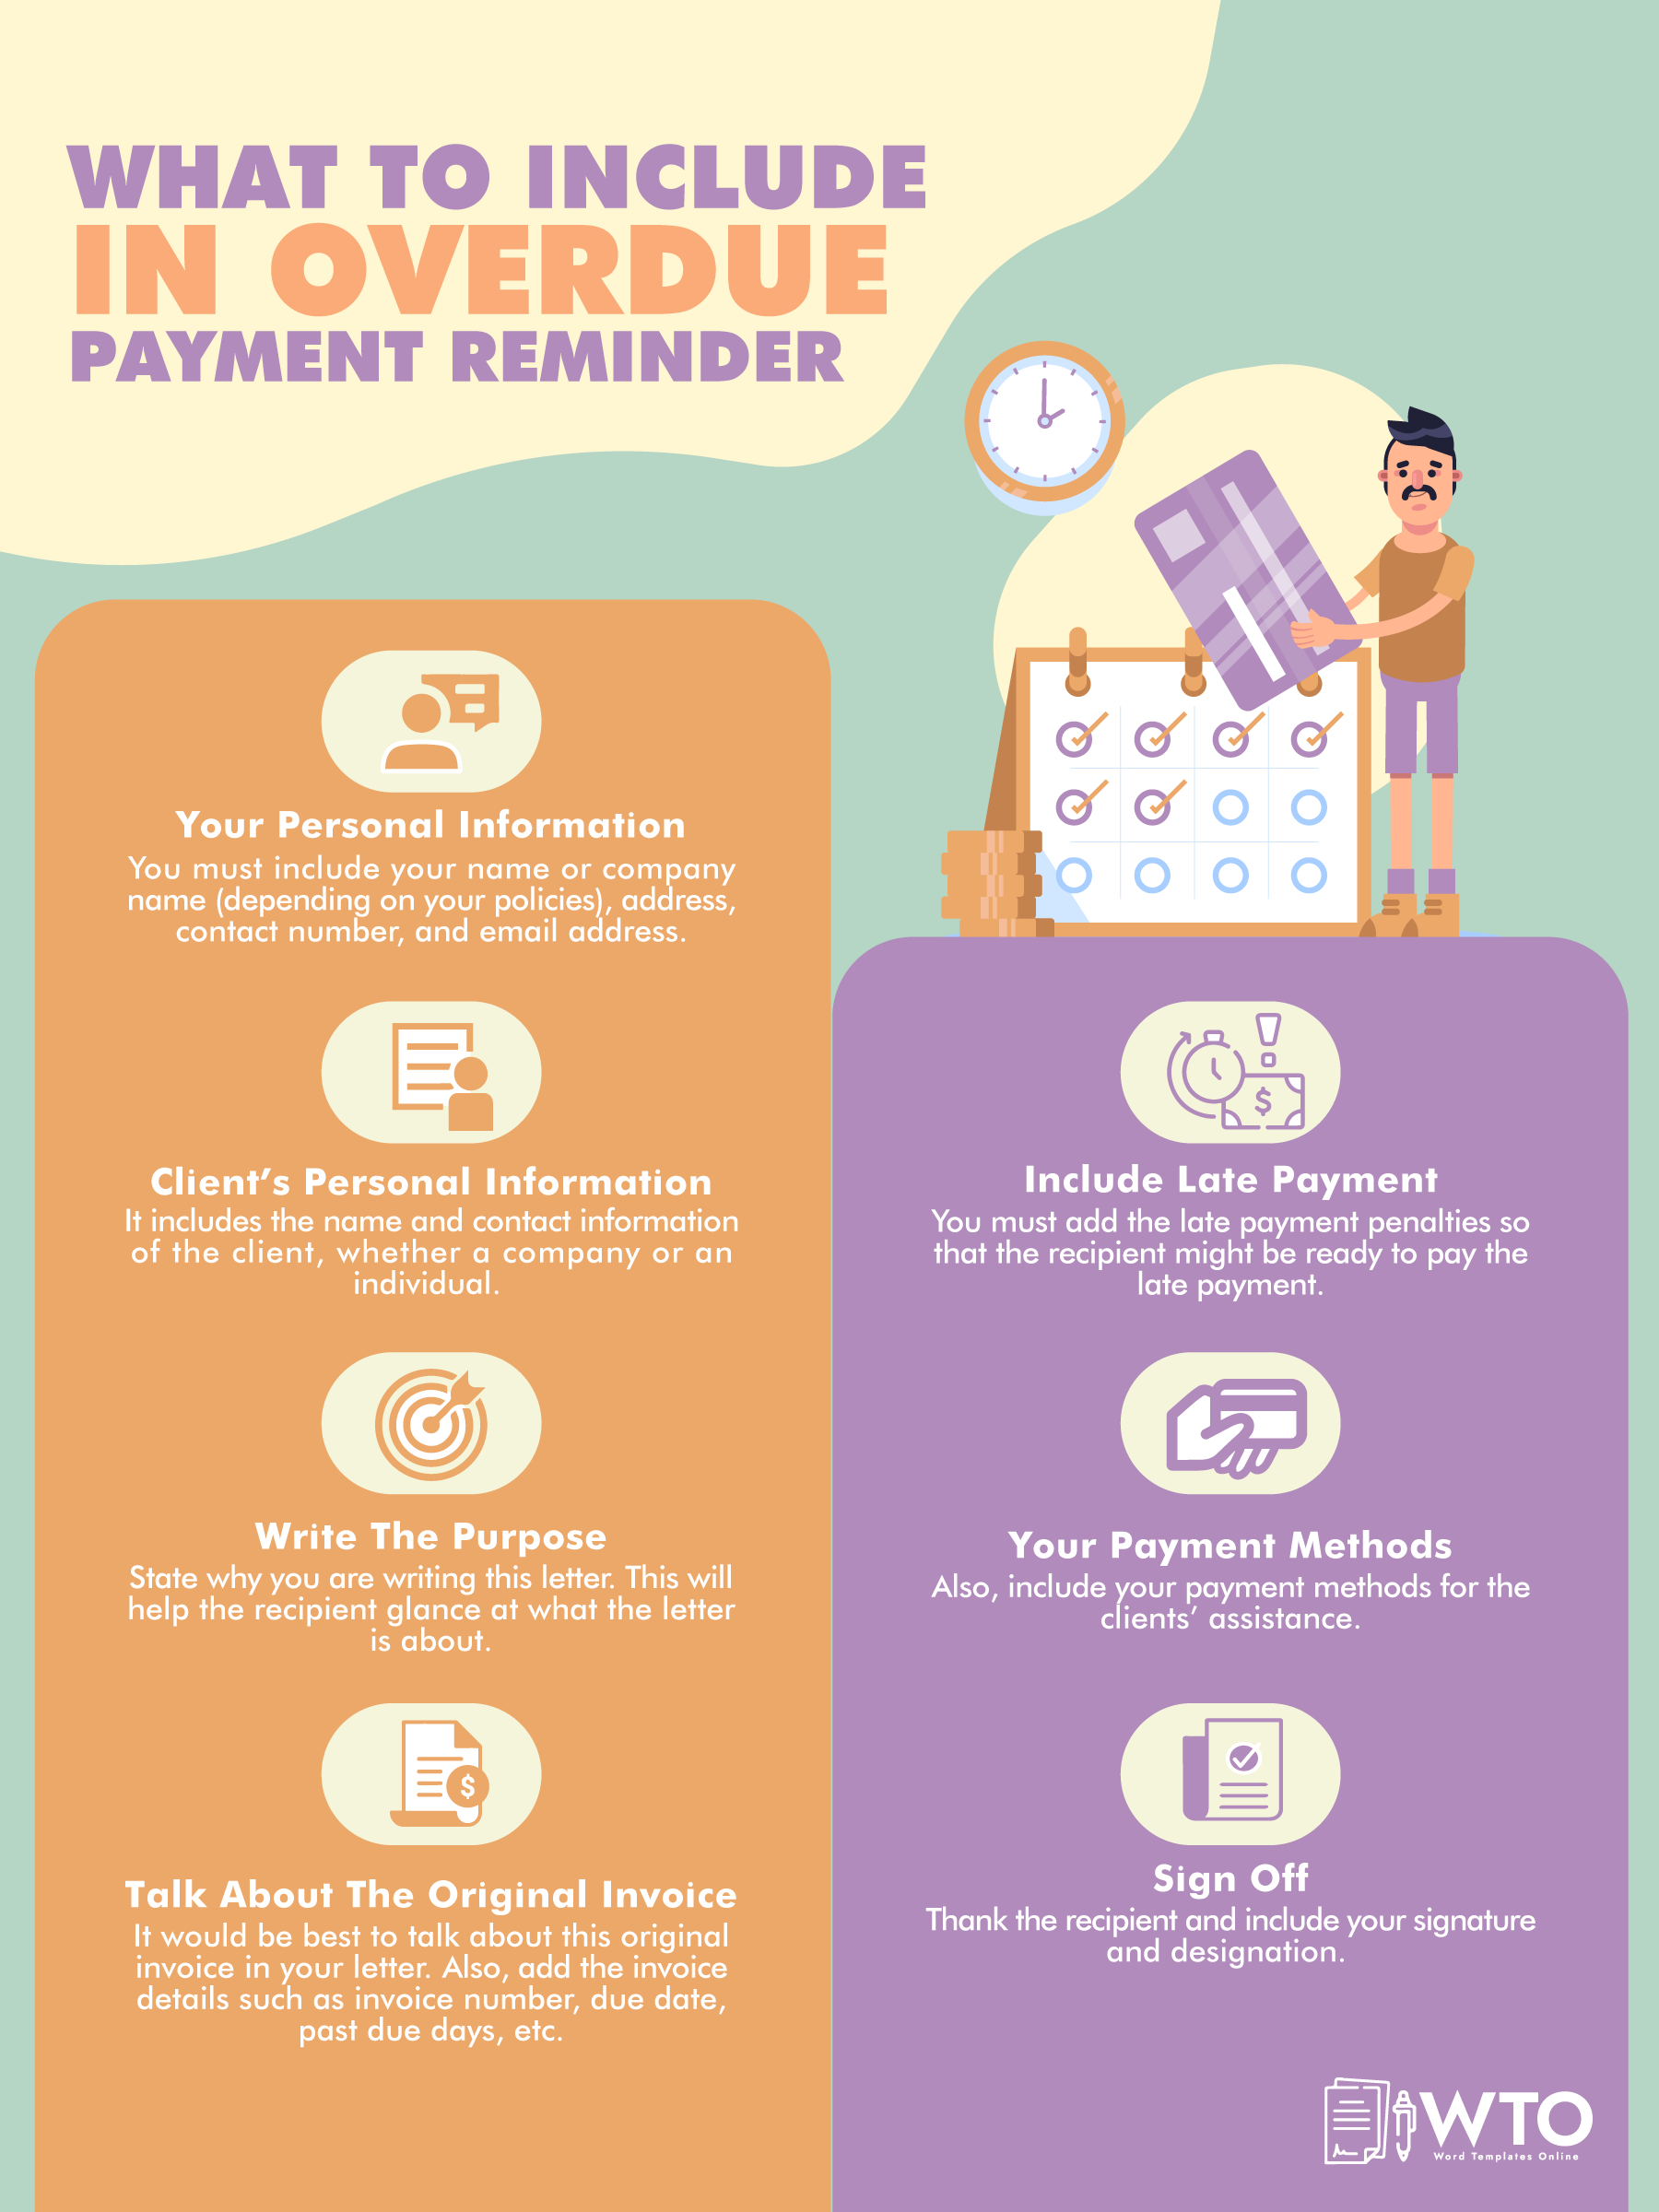 It is an infographic about what to include in an overdue payment reminder.